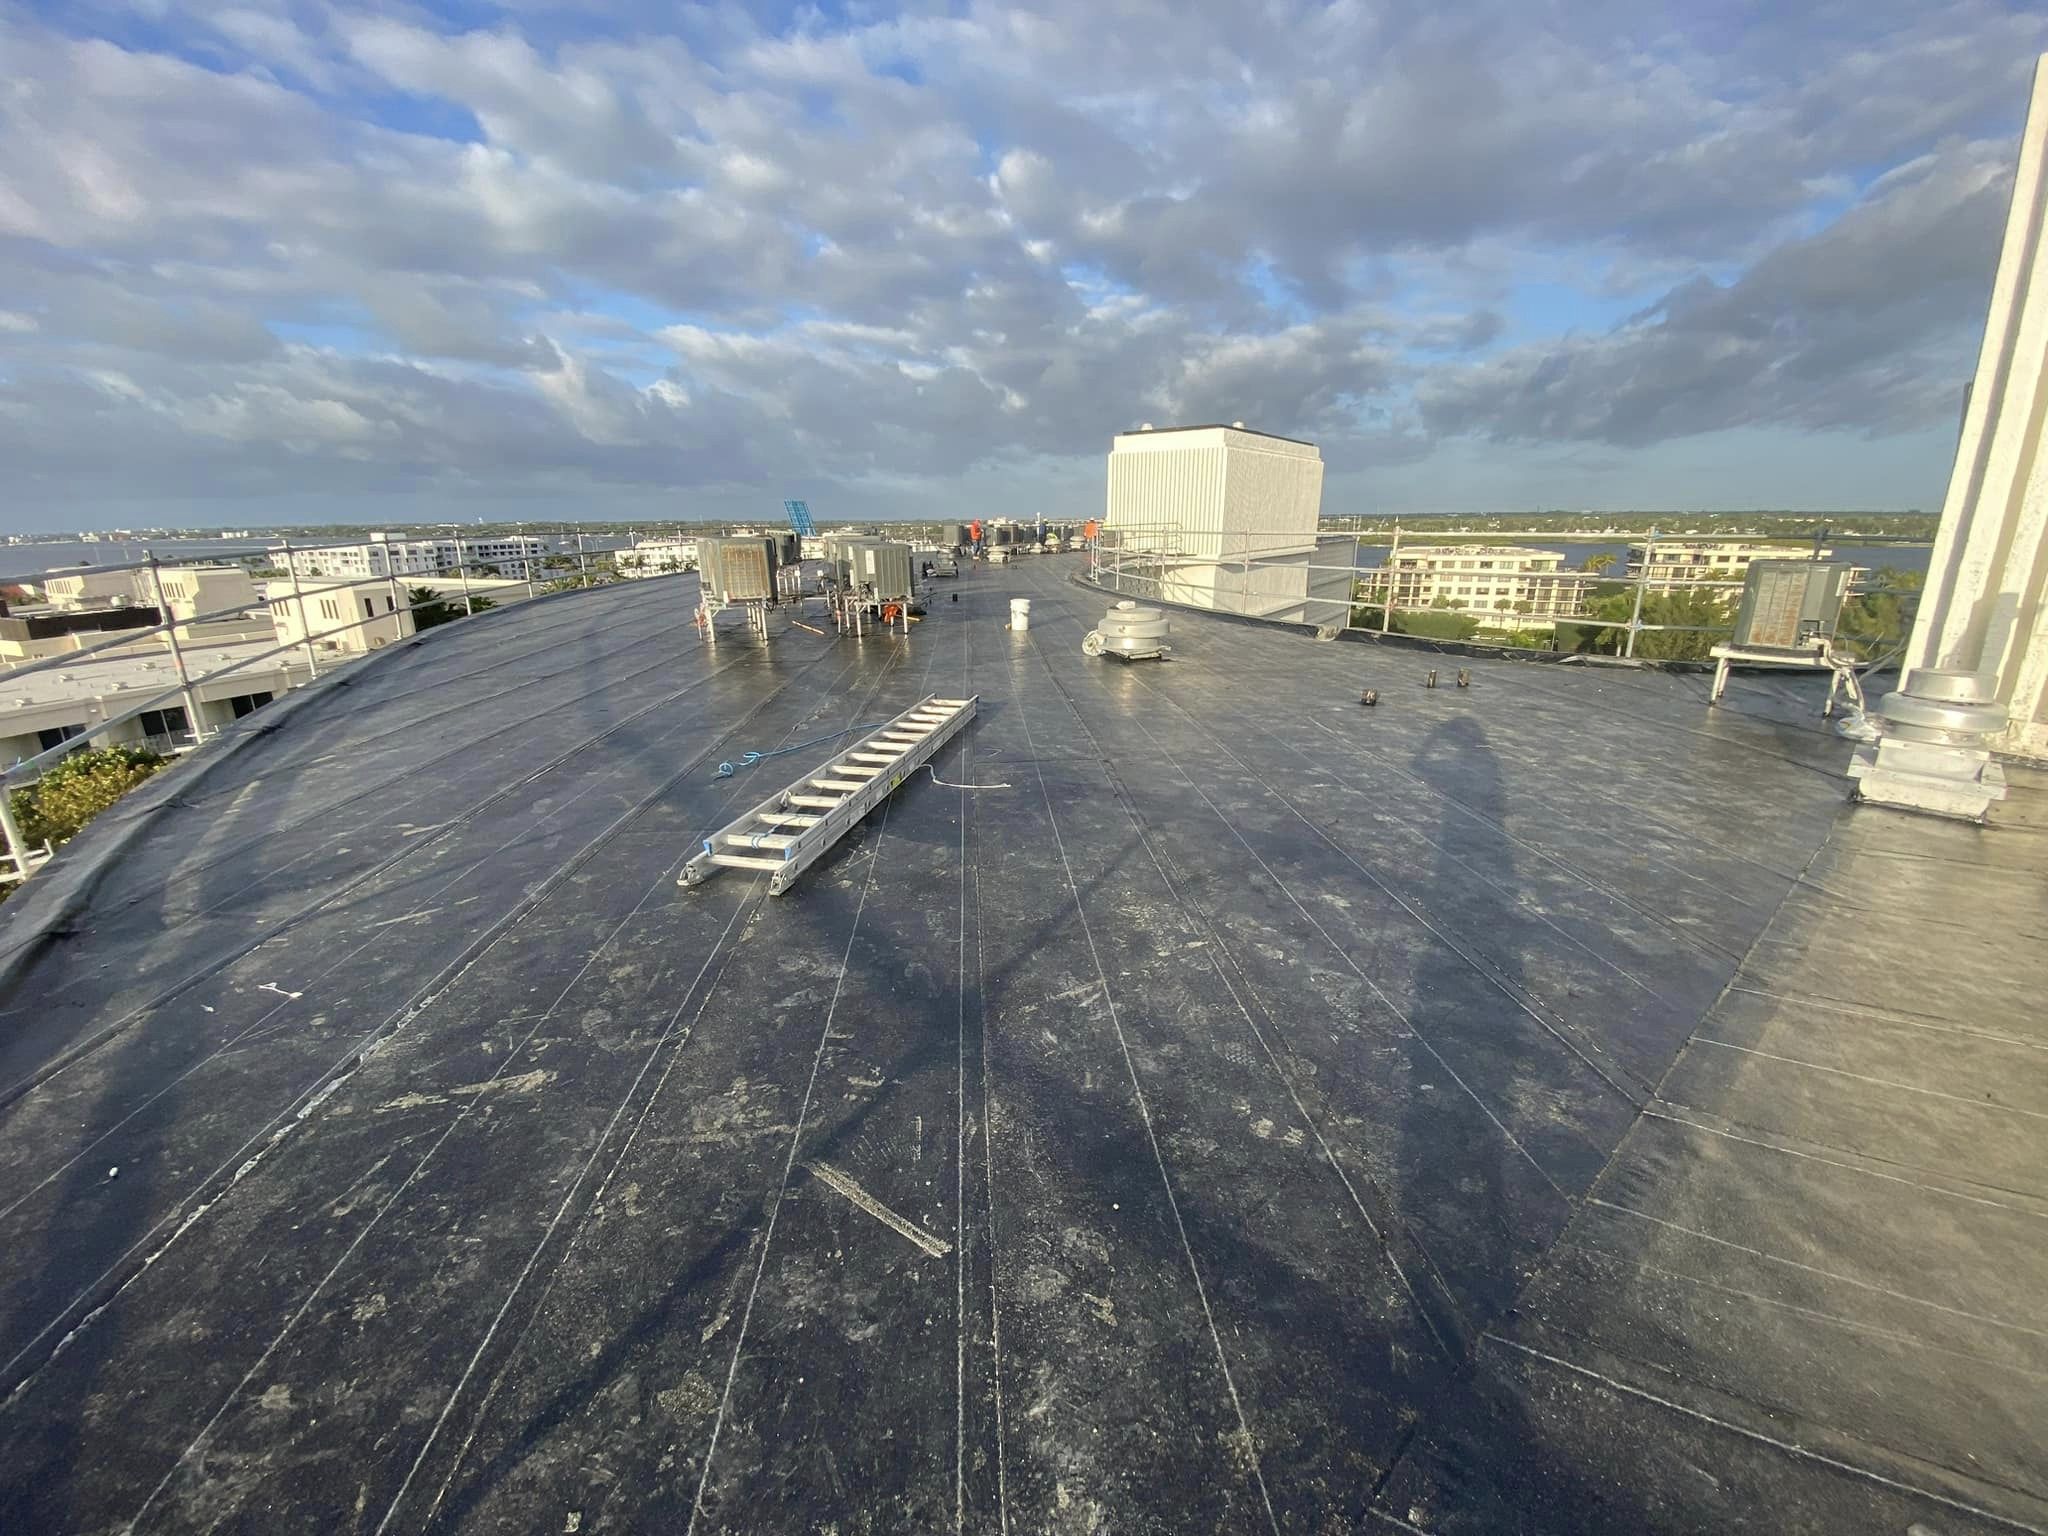 commercial roof | Roofing Concepts Unlimited